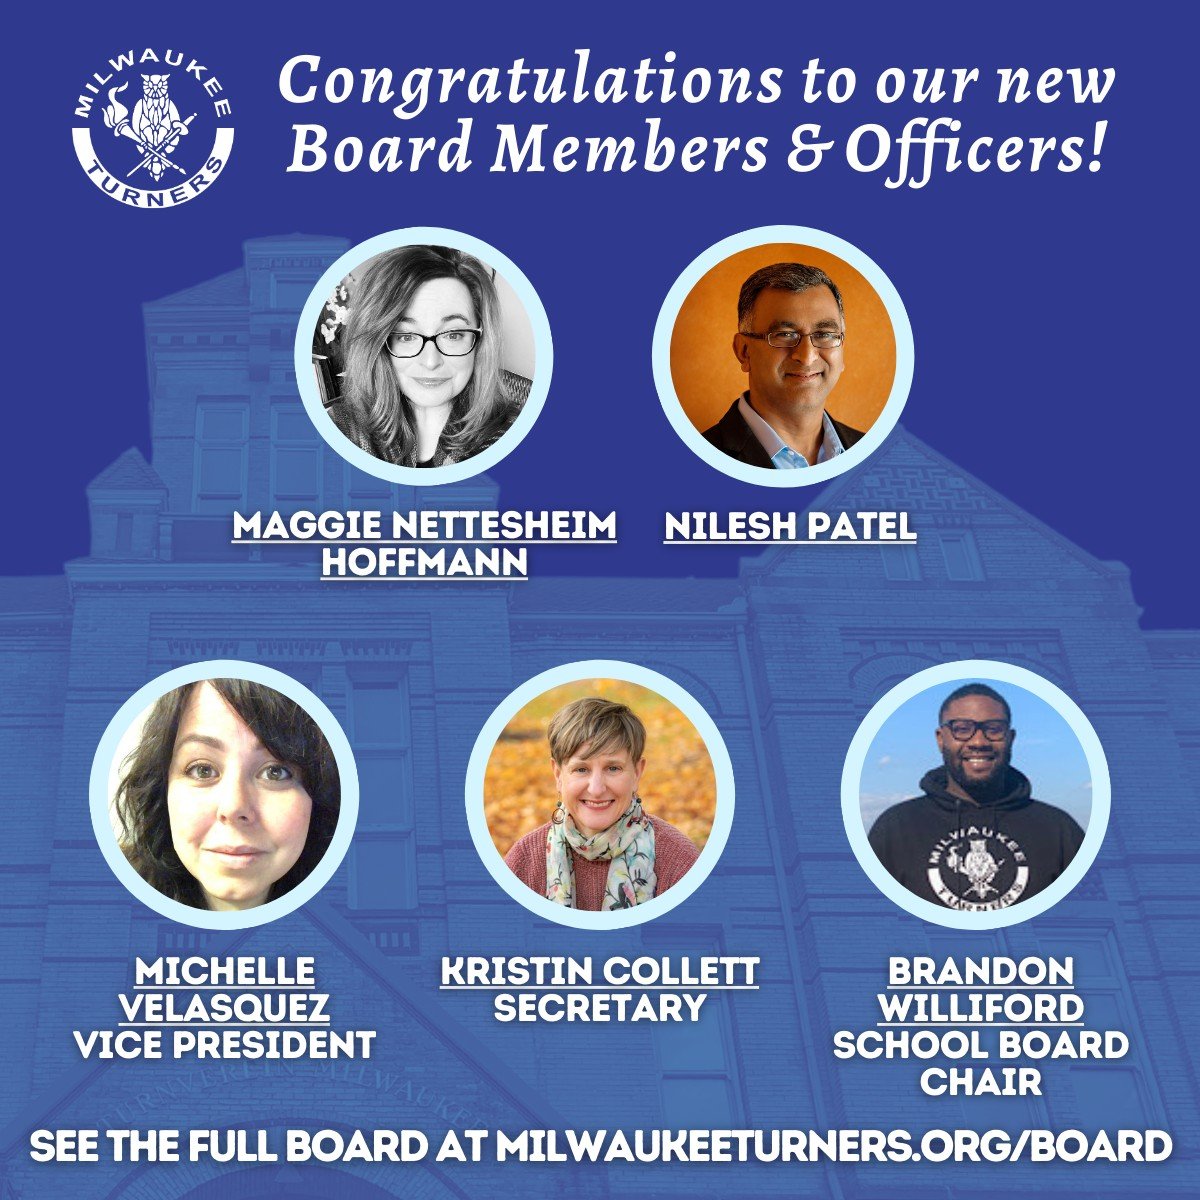 Congratulations to our new Board Members, elected at our Annual Meeting on April 24, and our new Board Officers! 

Maggie Nettesheim Hoffman and Attorney Nilesh Patel were both elected to our Board of Directors. 

Attorney Art Heitzer remains our Boa